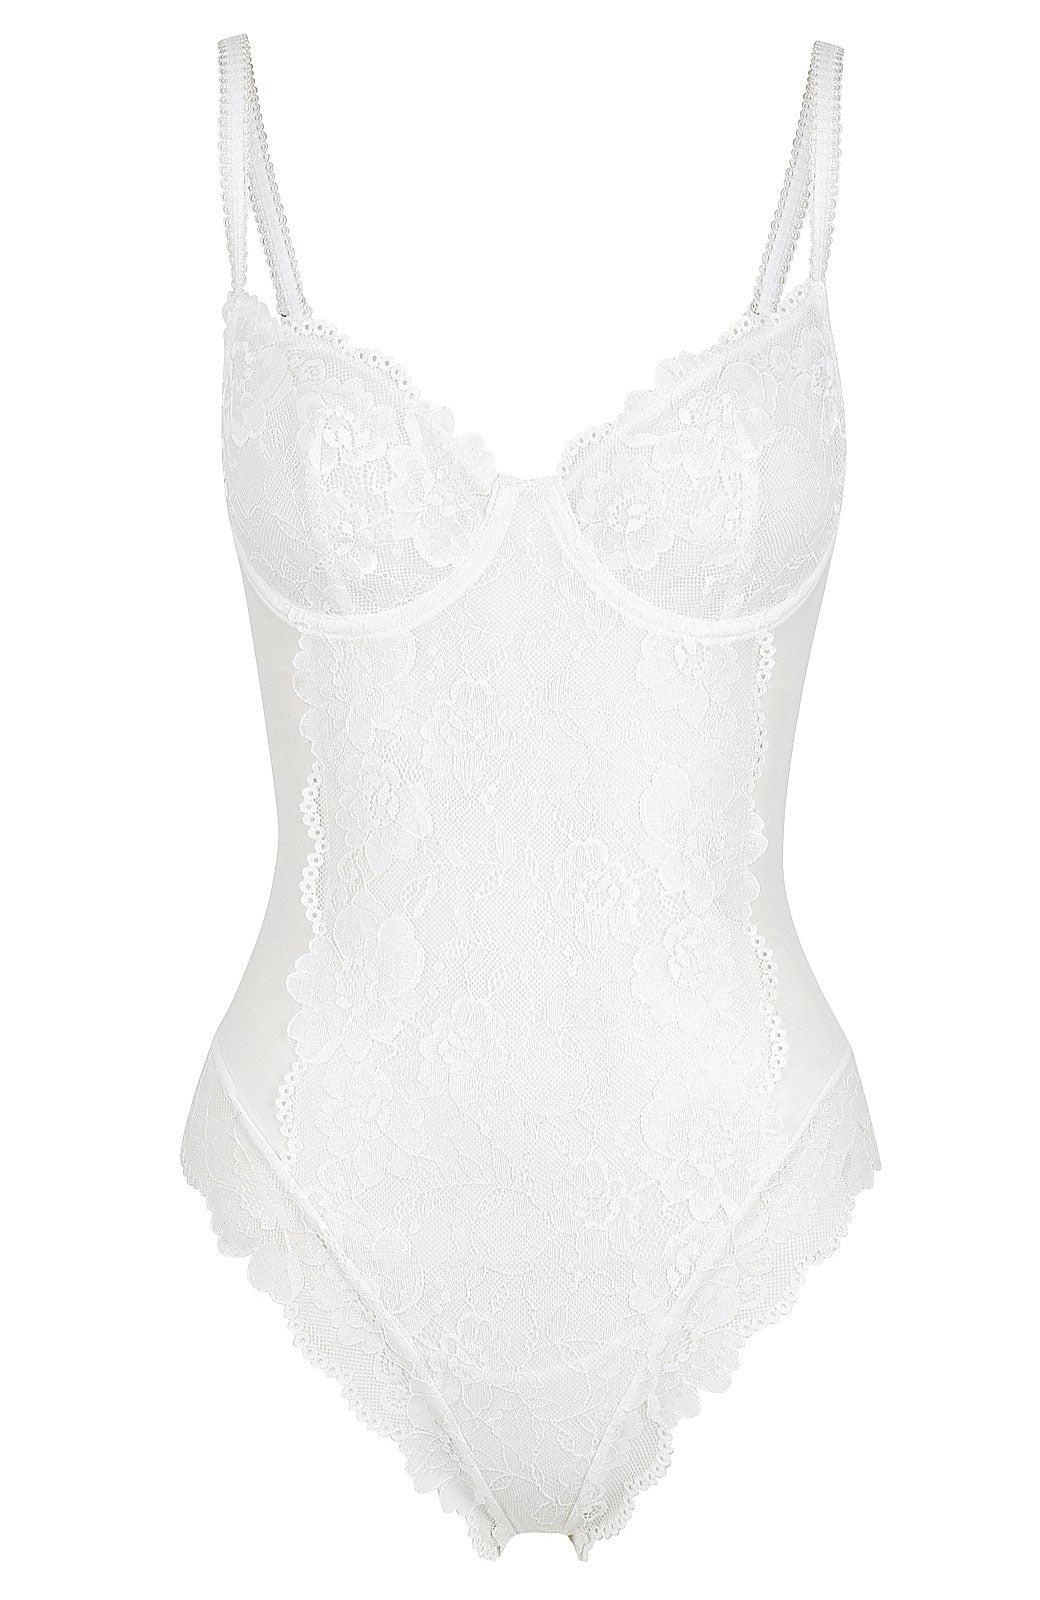 Wedding Bodysuit With Beads and Sequins, Lace Bridal Bodysuit, Open Back  Body With V-neckline -  Canada